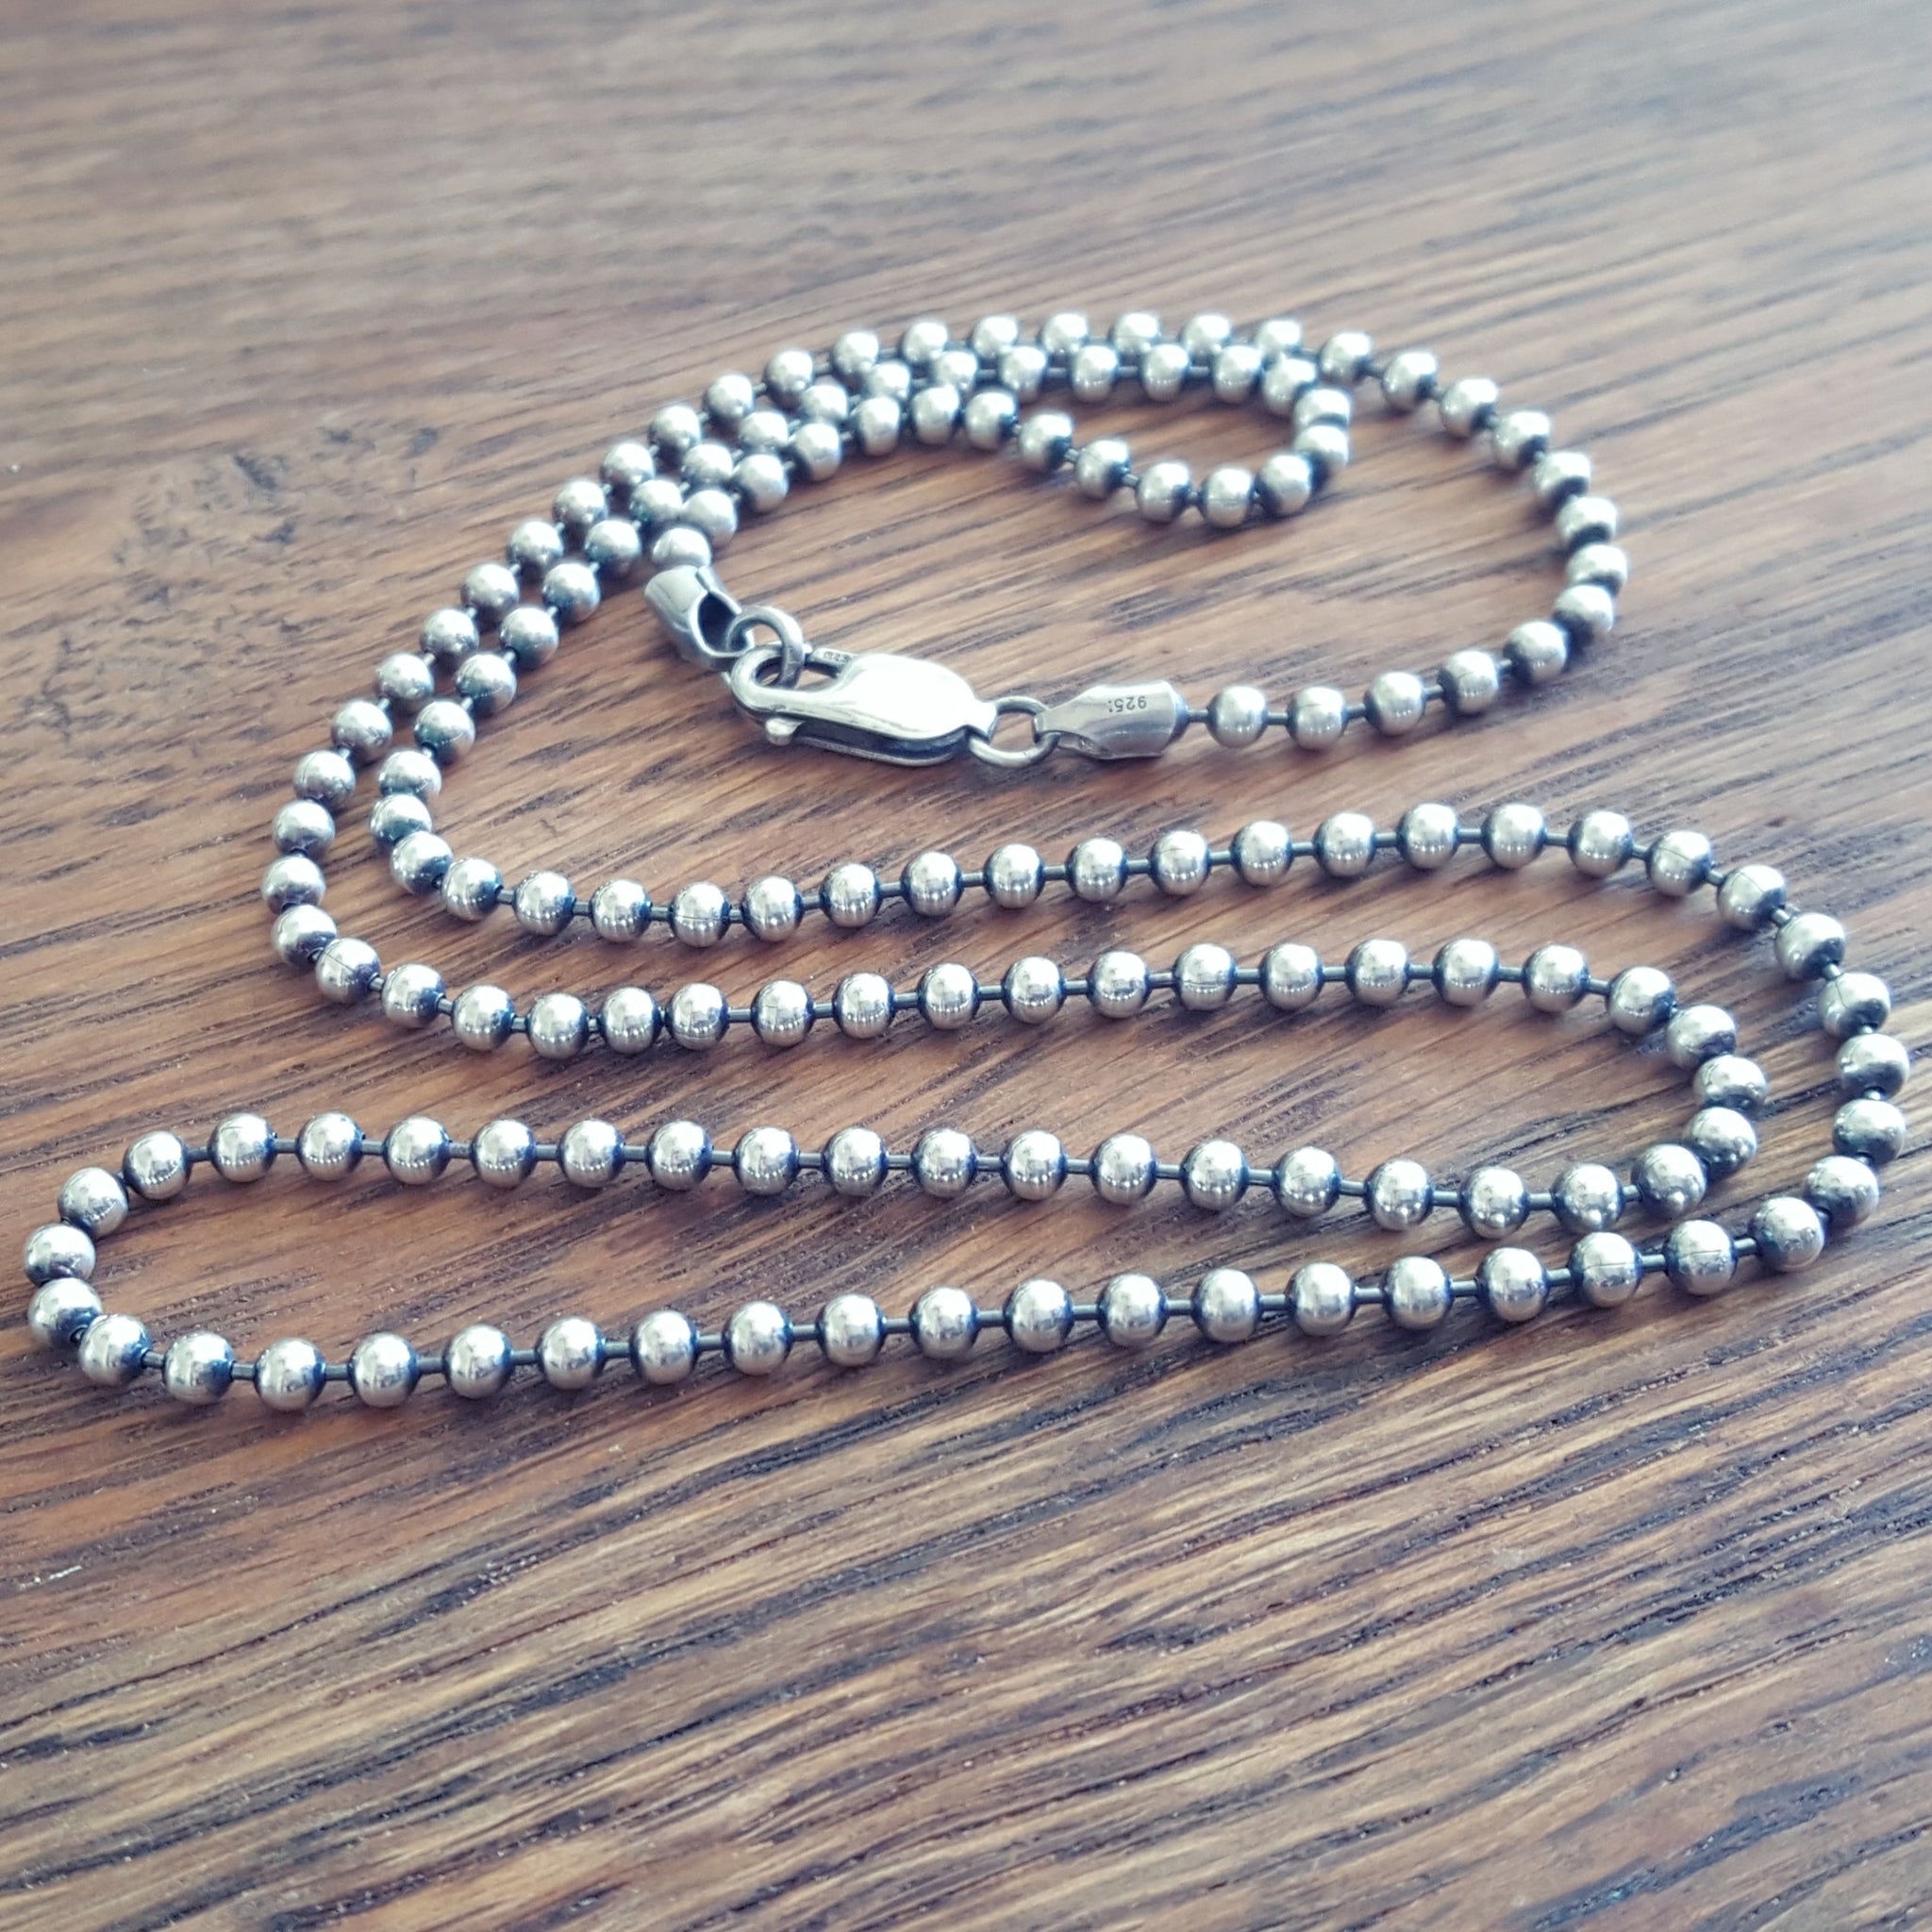 Oxidized Sterling Silver Ball Chain Necklace For Men Or Women ...